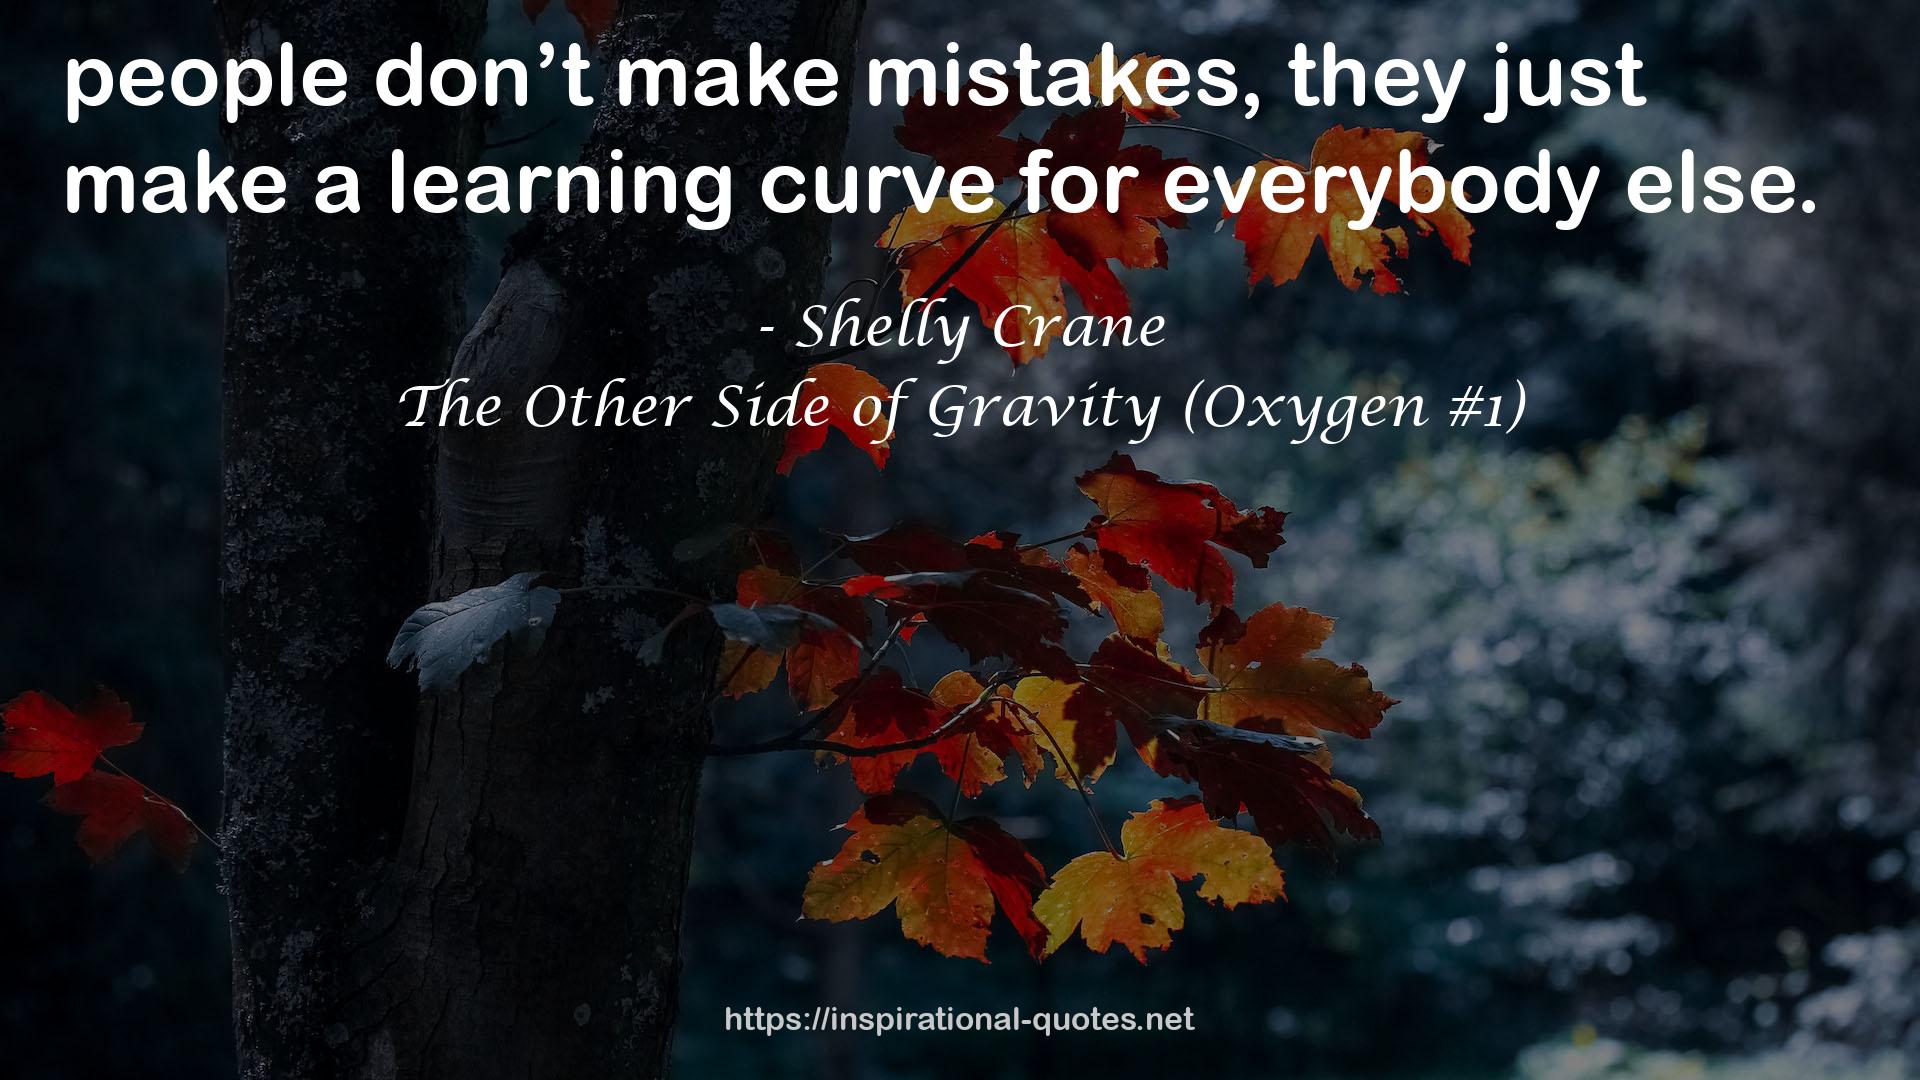 The Other Side of Gravity (Oxygen #1) QUOTES